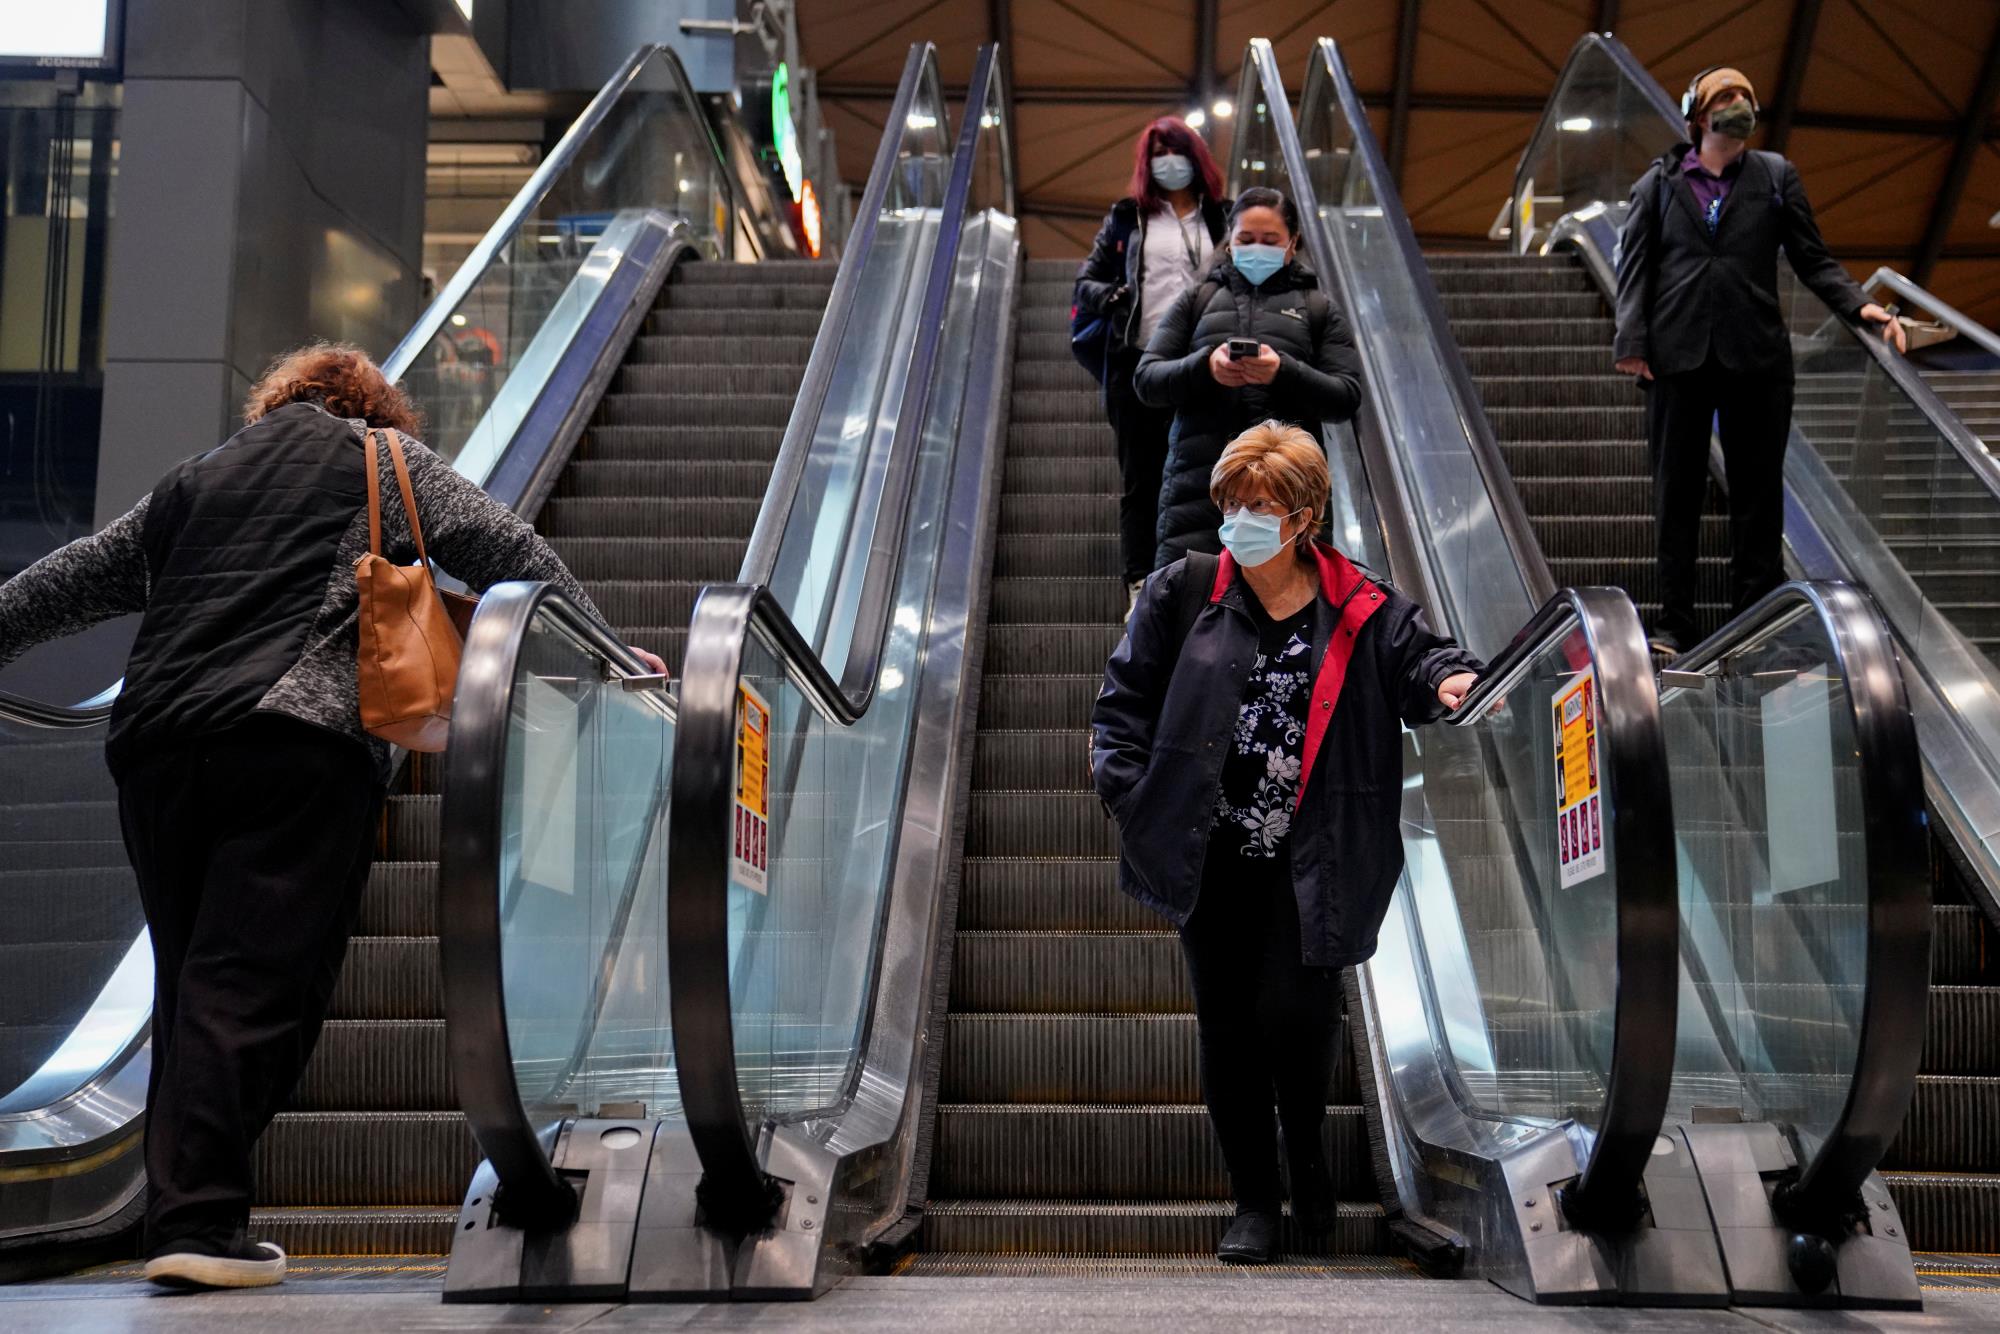 Morning commuters exit Southern Cross Station on the first day of eased coro<em></em>navirus disease (COVID-19) restrictions for the state of Victoria following an extended lockdown in Melbourne, Australia, June 11, 2021.  REUTERS/Sandra Sanders